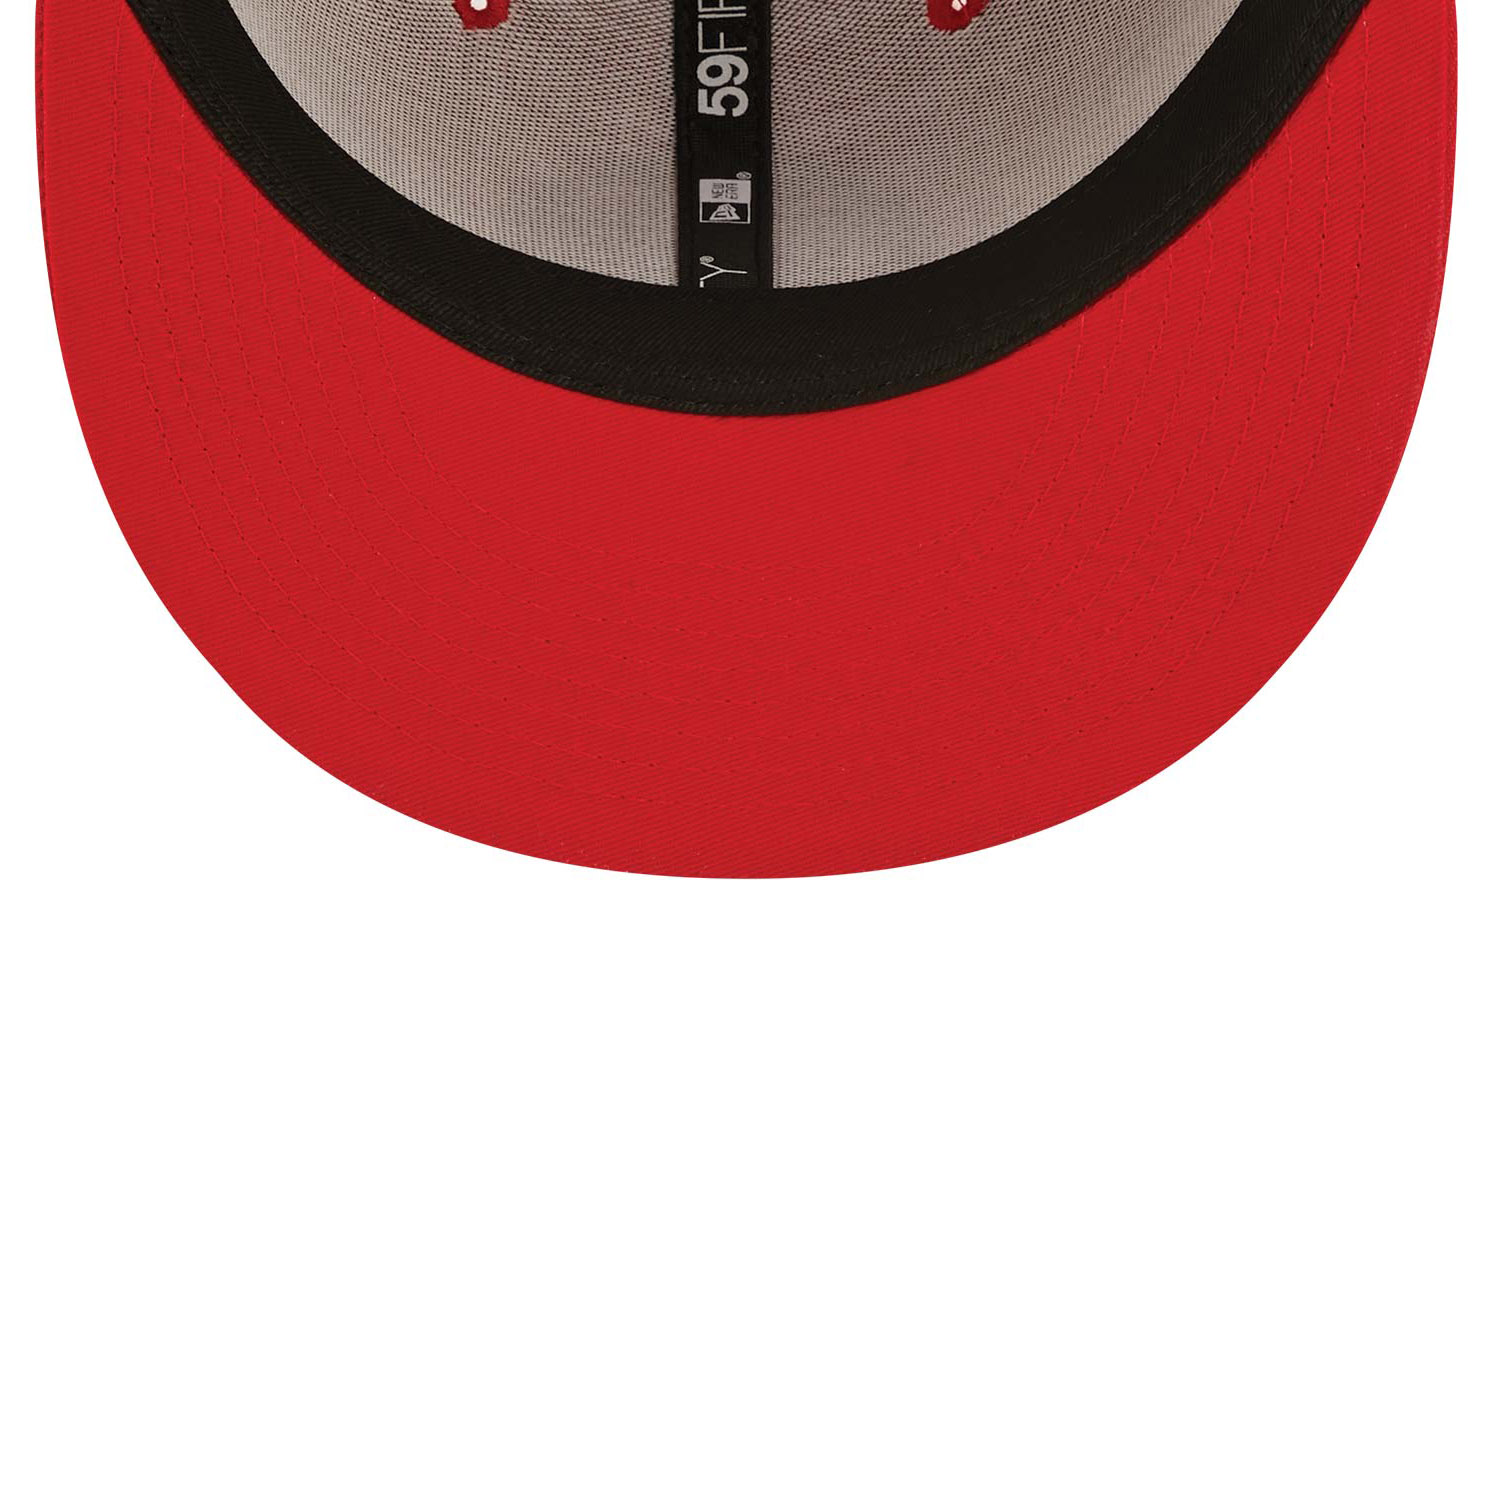 San Francisco 49ers NFL Sideline 2022 Red 59FIFTY Fitted Cap